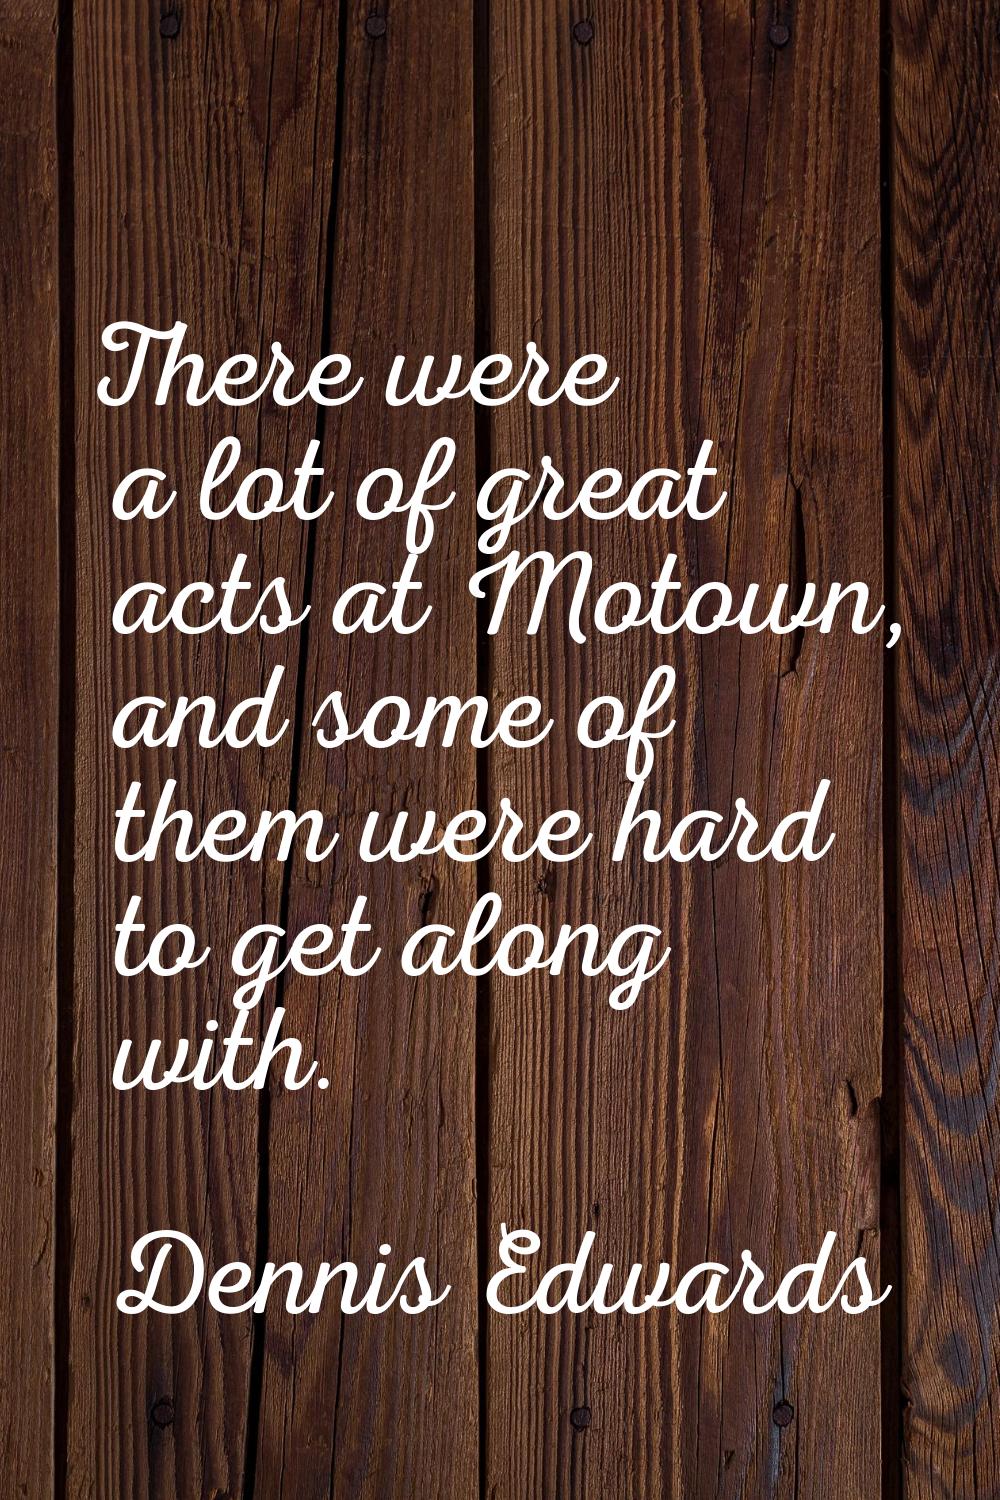 There were a lot of great acts at Motown, and some of them were hard to get along with.